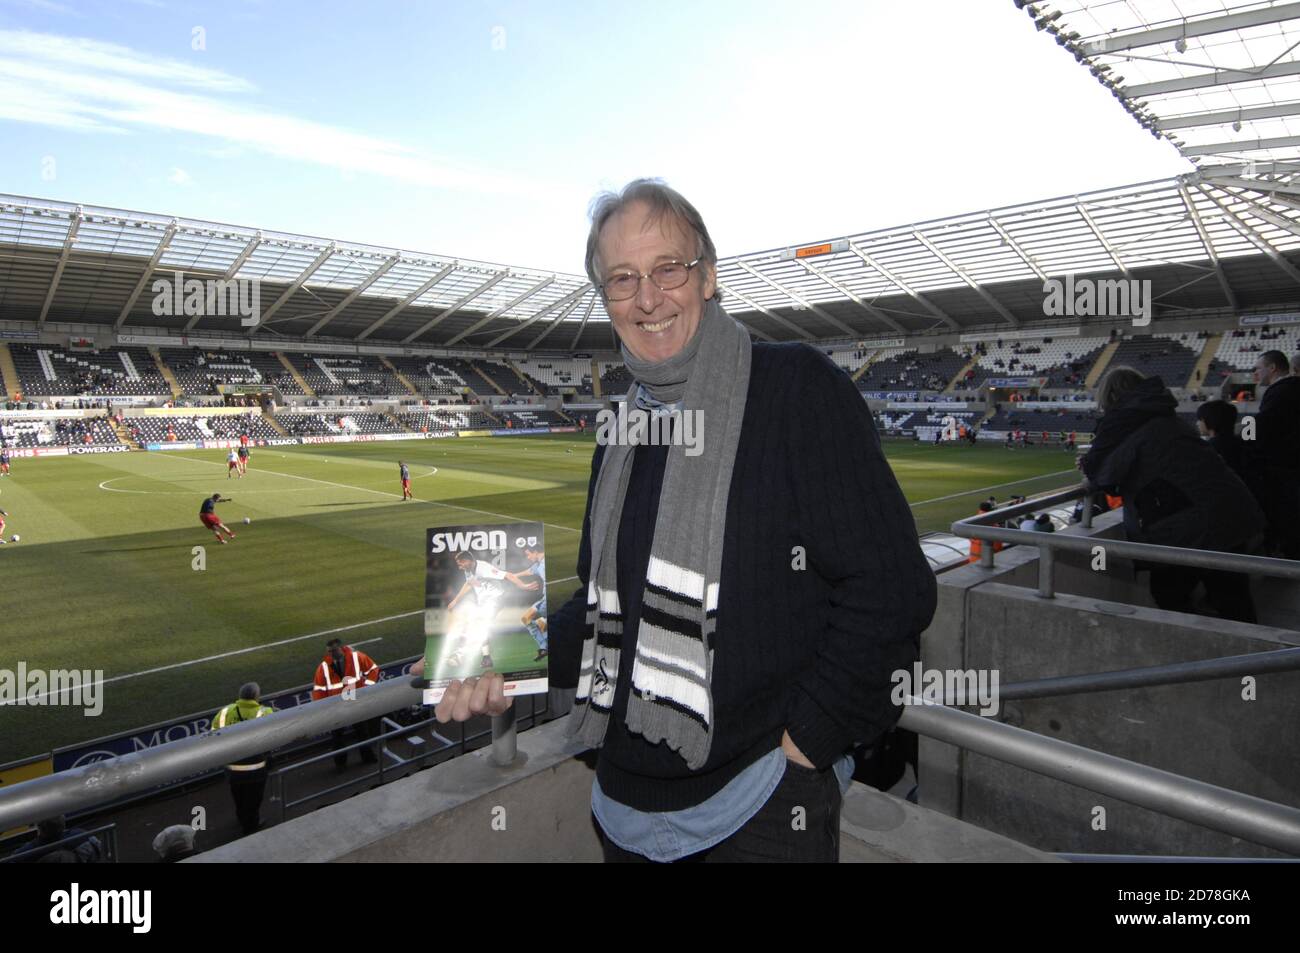 Spencer Davis returns to his roots in Swansea to watch a football match at the Liberty Stadium in Swansea on 6th Feb 2010. Stock Photo